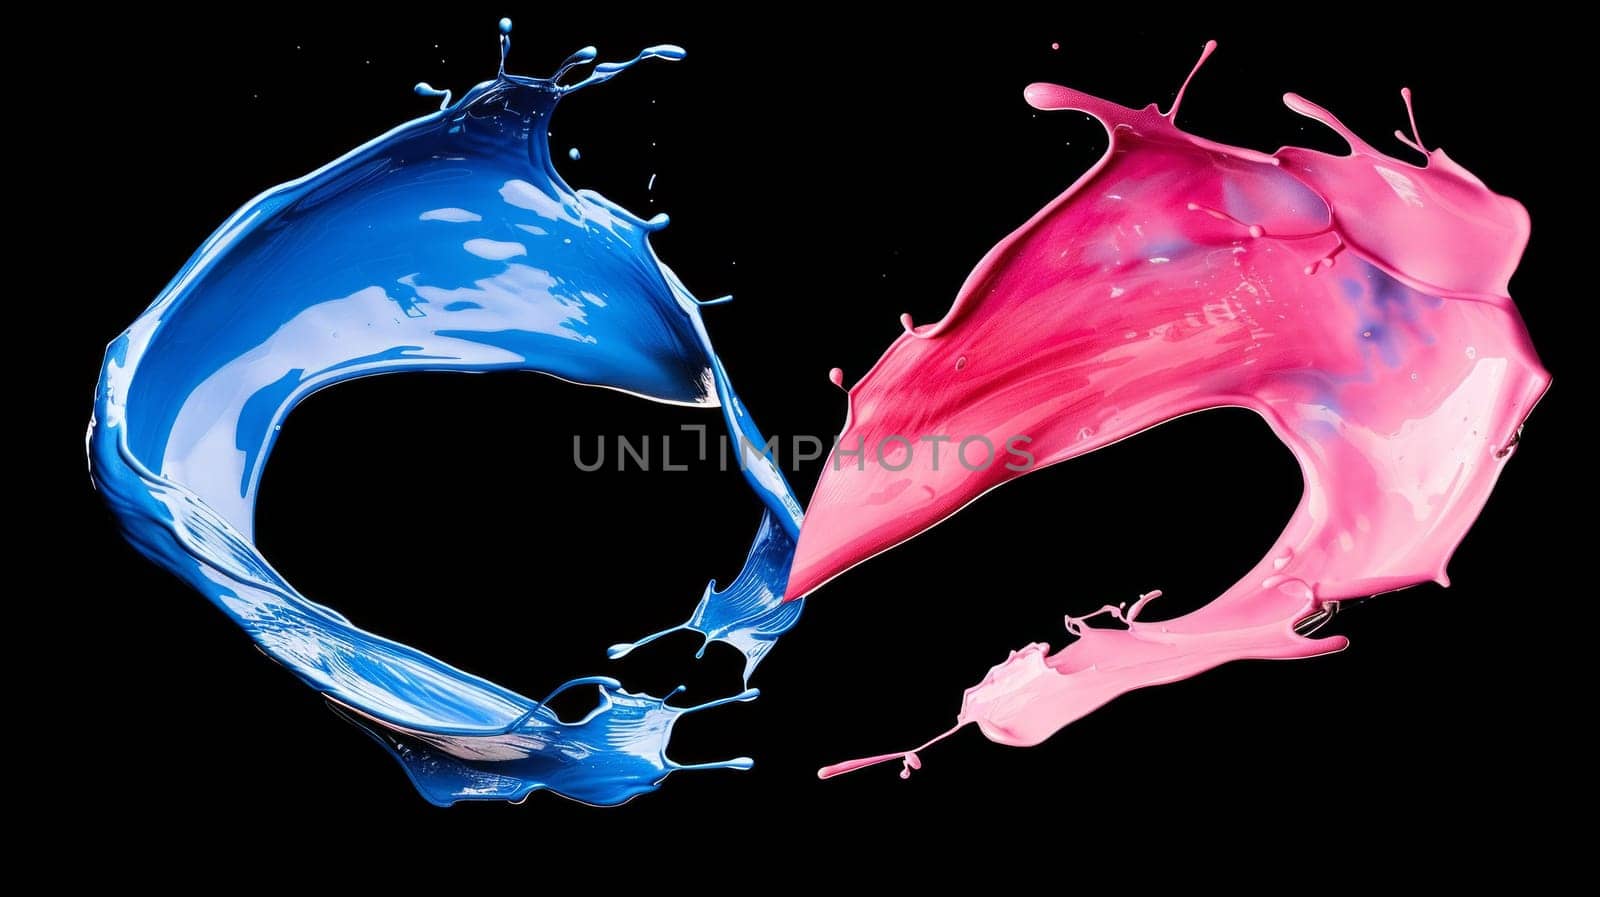 Two vibrant colored liquids collide, creating a mesmerizing splash, set against a deep black backdrop by but_photo